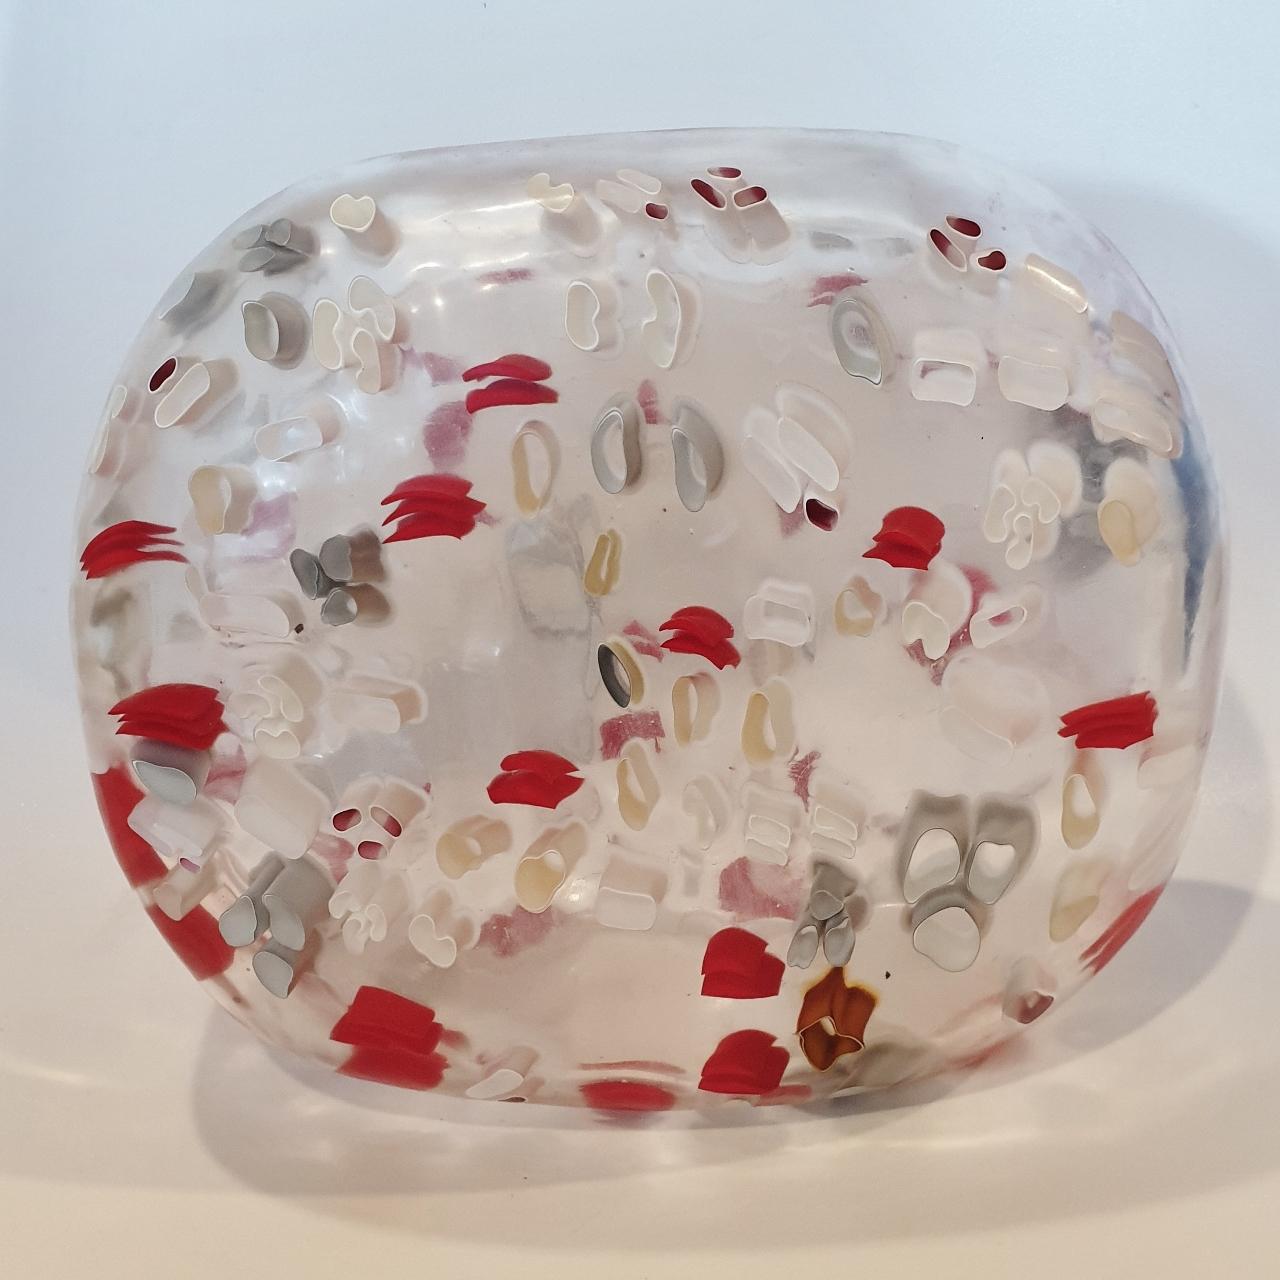 Hilary Crawford Abstract Sculpture - As far as the eye can see - contemporary modern abstract glass sculpture